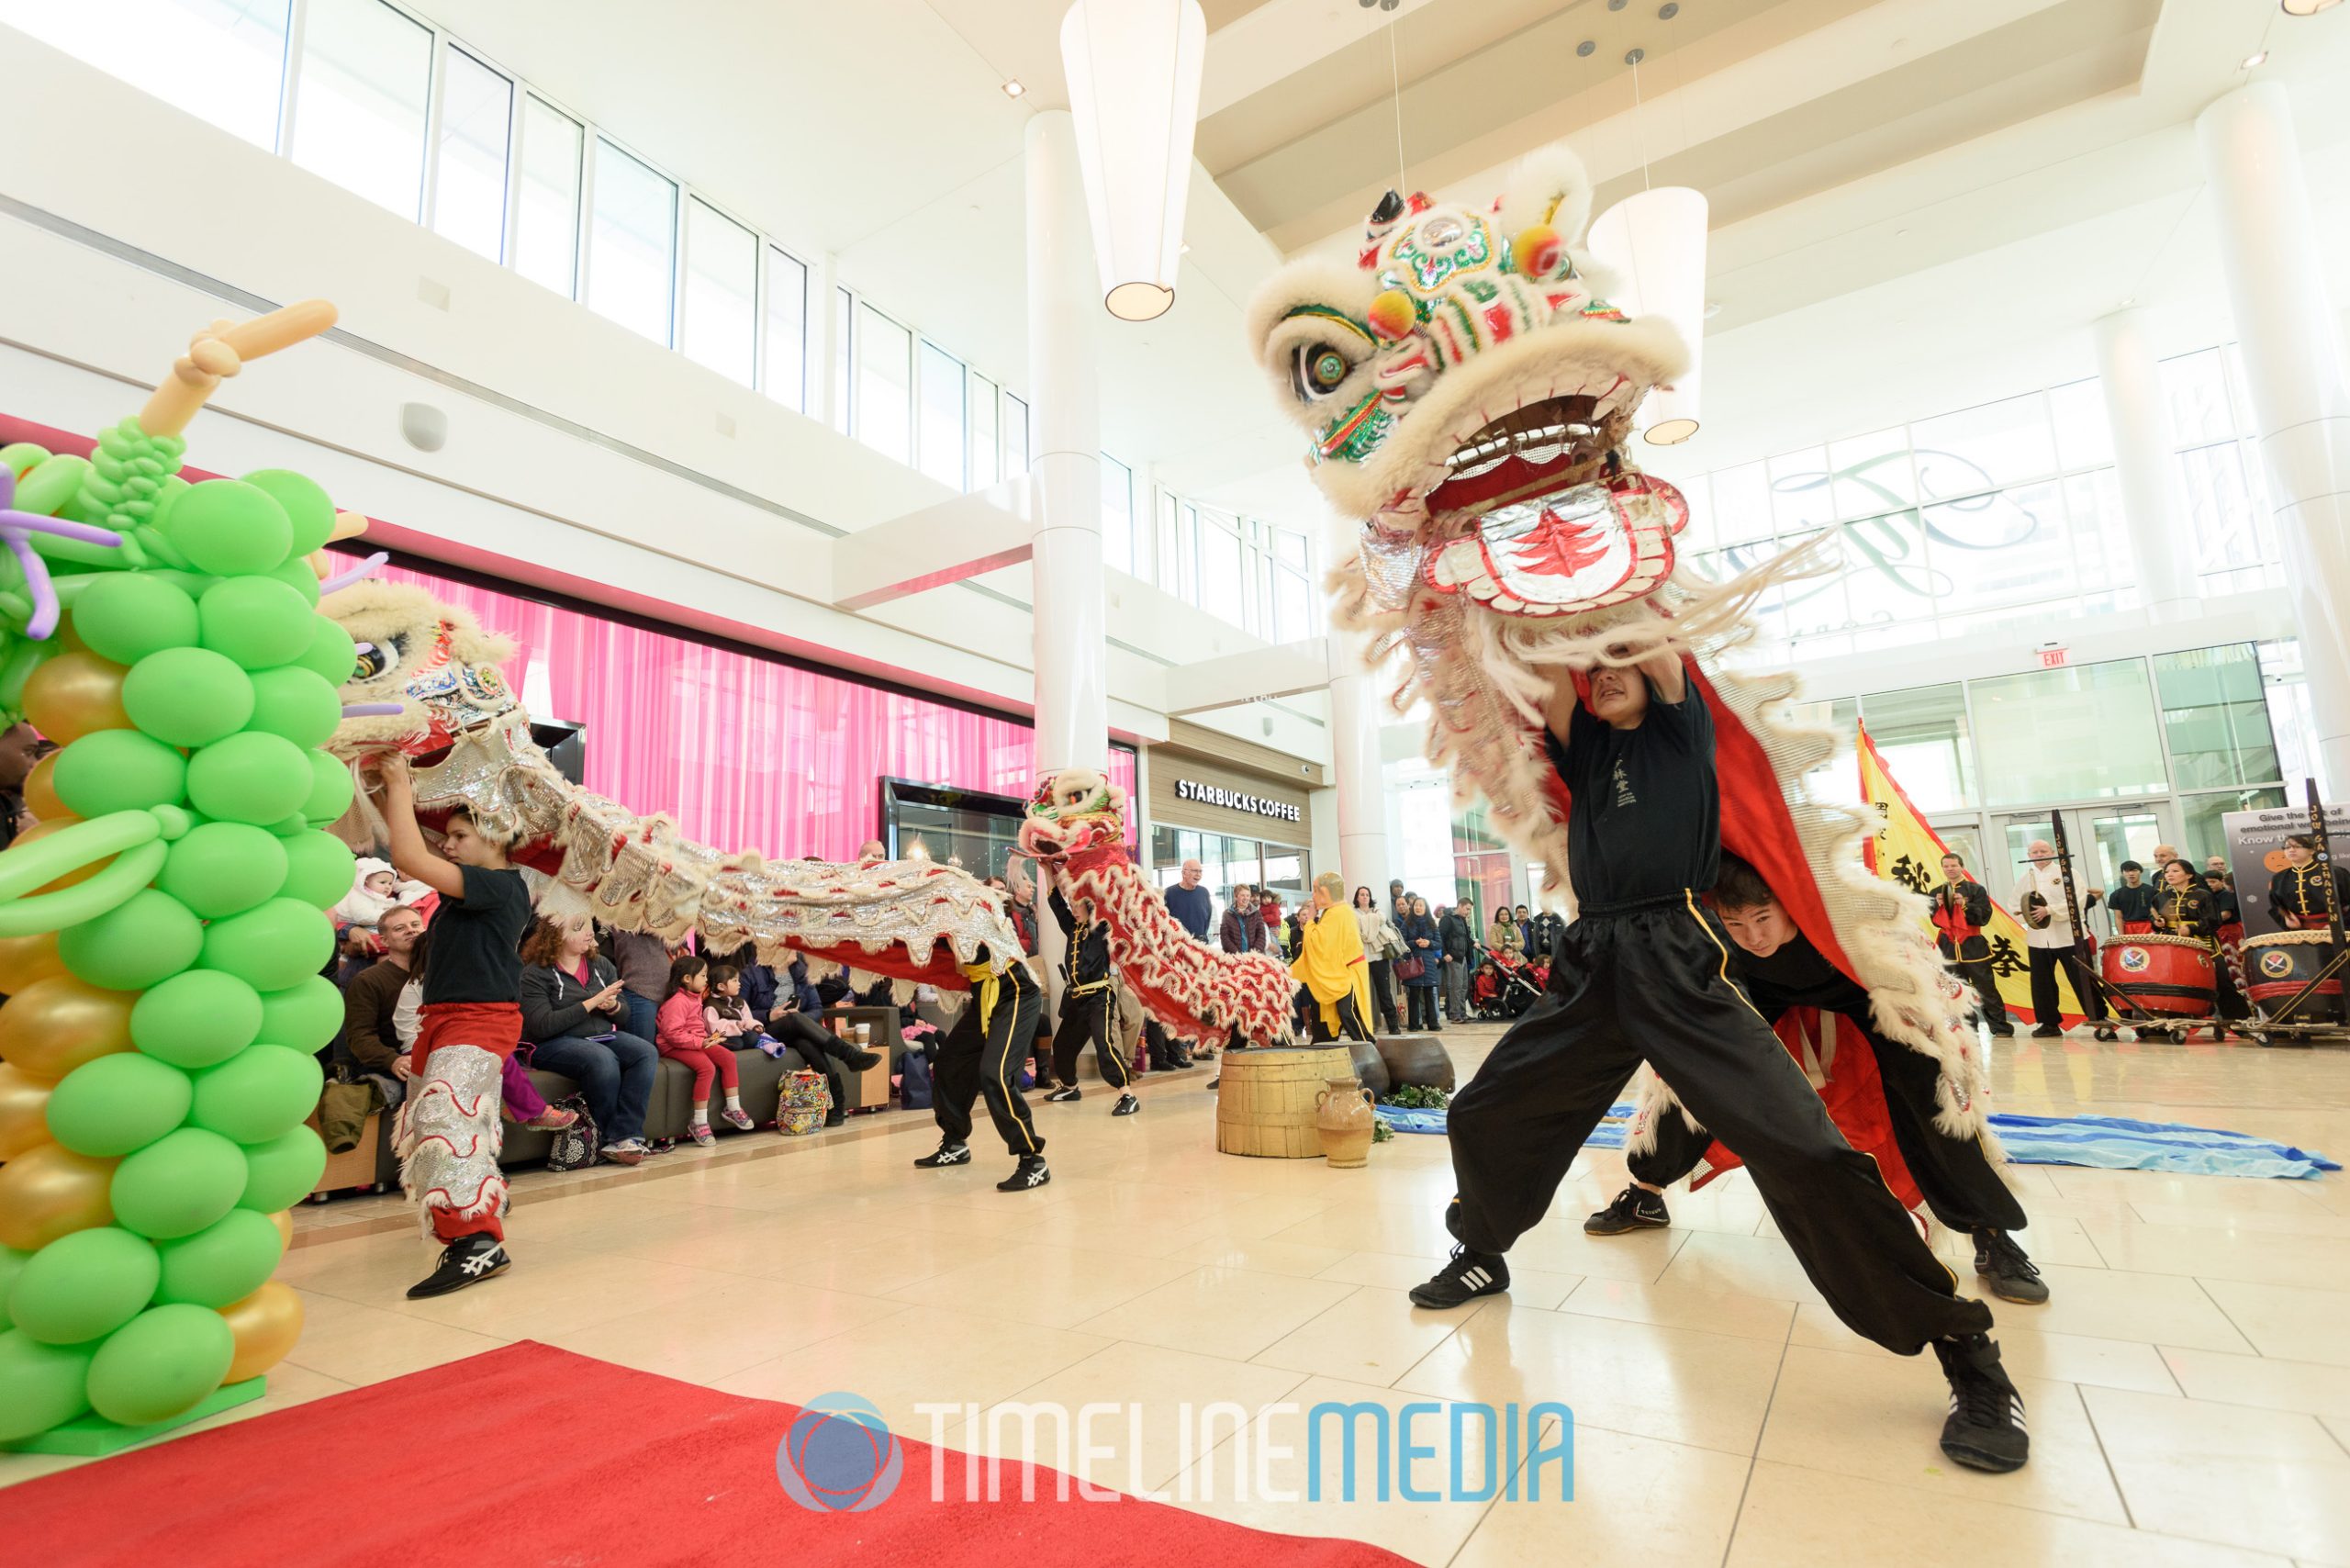 Dancing dragon -performing at the Concourse at Tysons Corner Center ©TimeLine Media